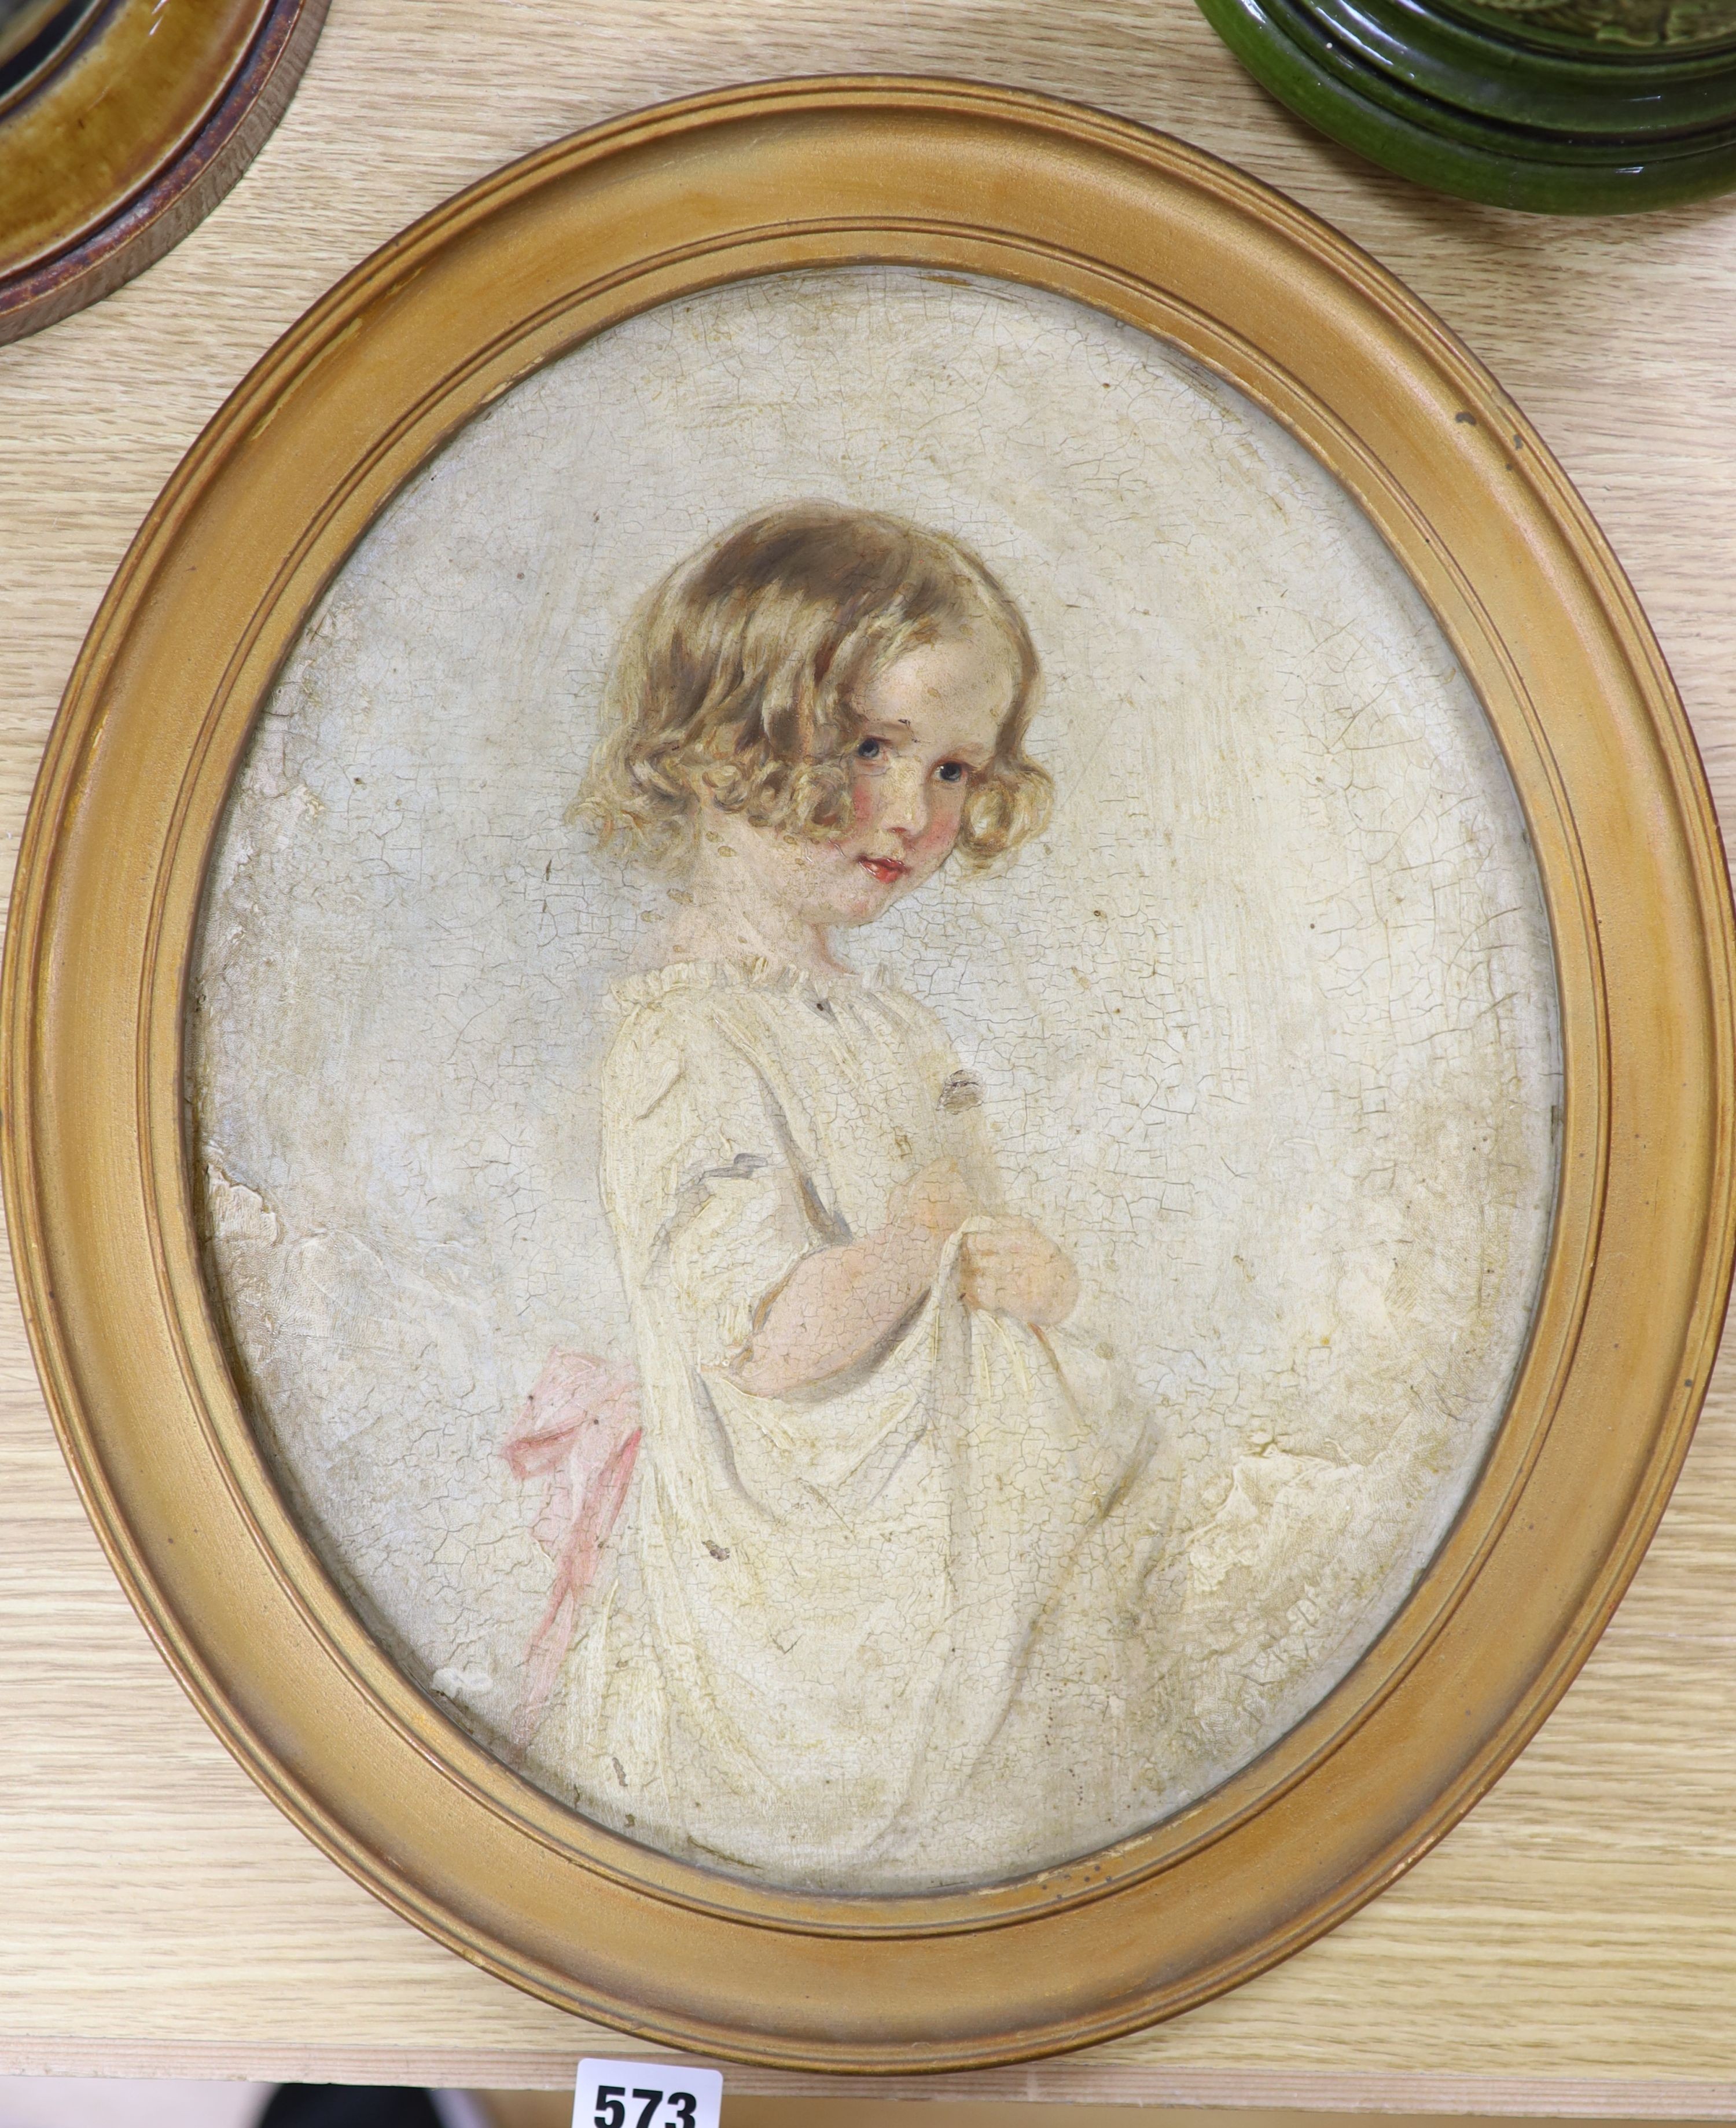 Early 20th century English School, oil on board, Portrait of a young girl, oval, 34 x 29cm - Image 2 of 3